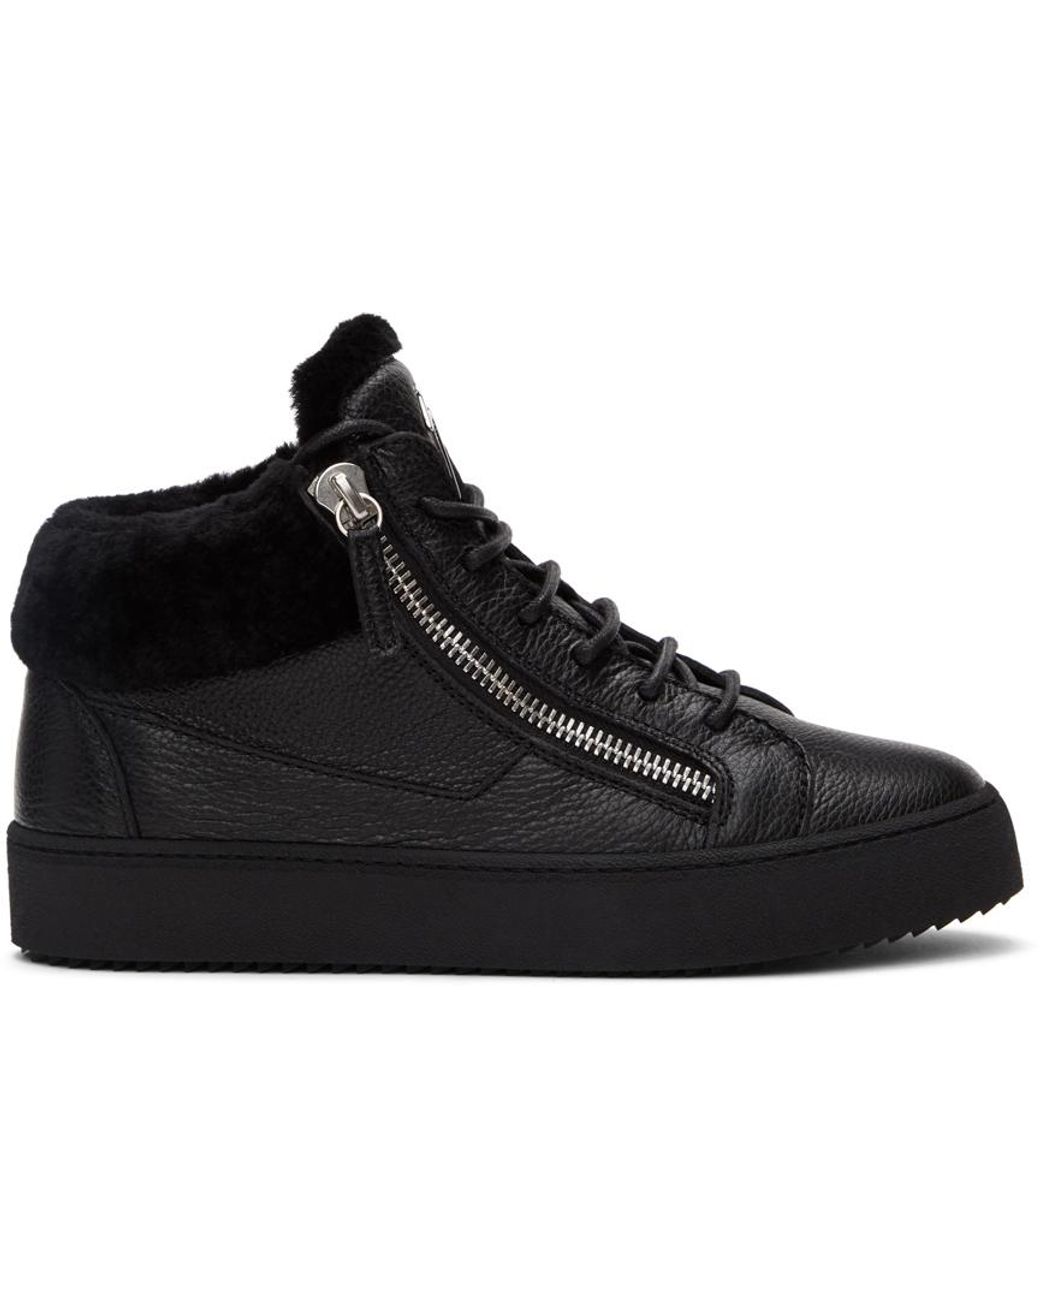 Giuseppe Zanotti Leather Arena May London Sneakers in Black for 